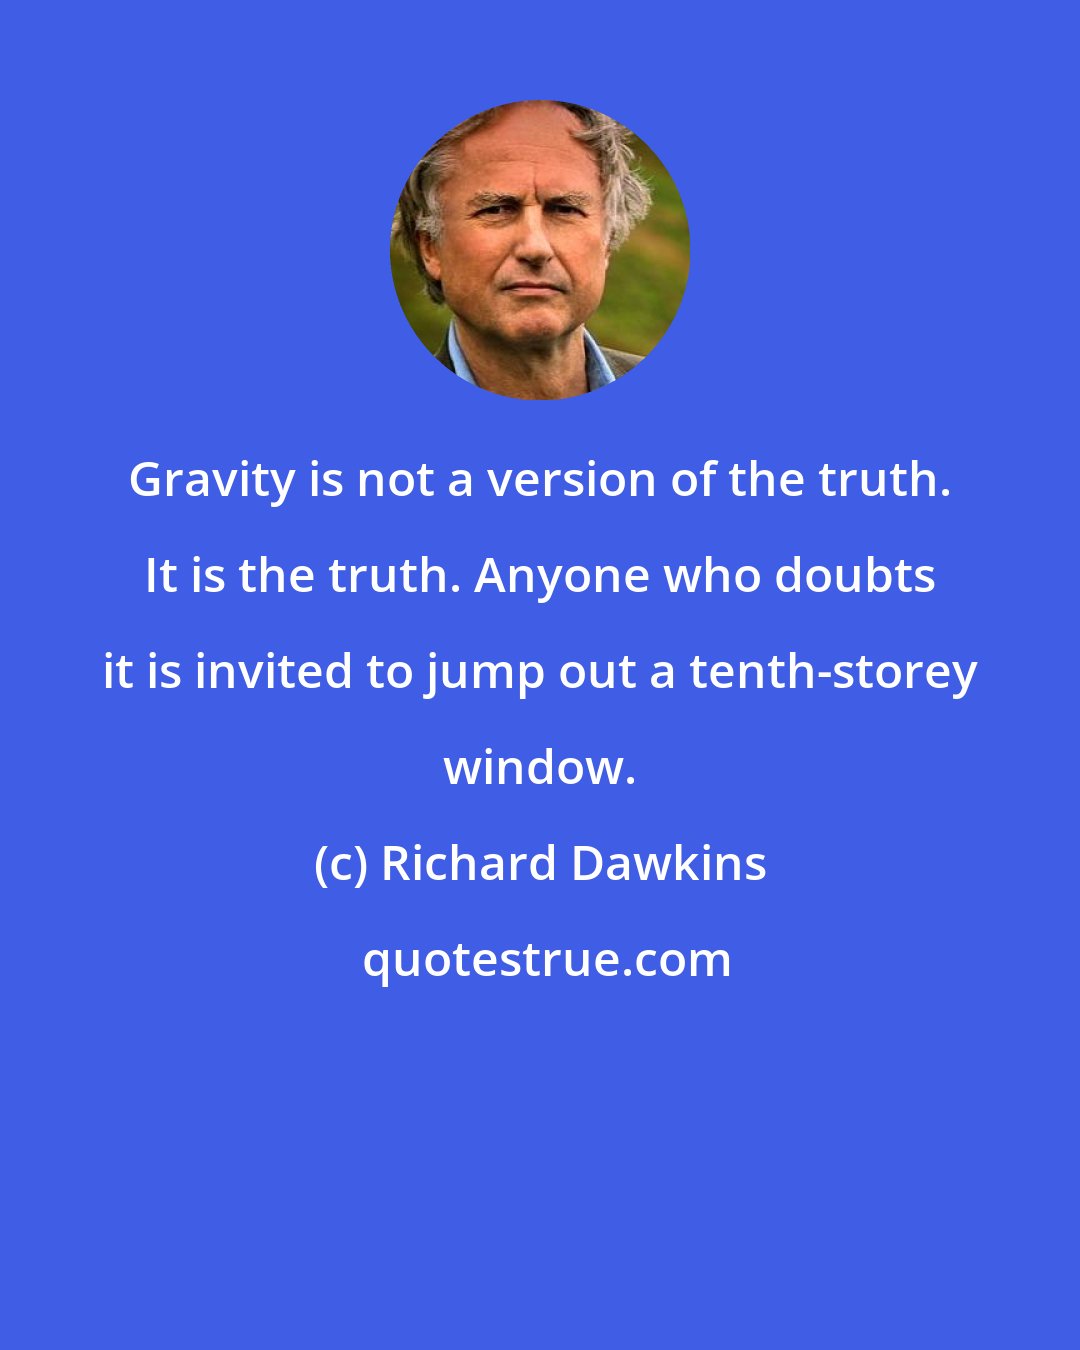 Richard Dawkins: Gravity is not a version of the truth. It is the truth. Anyone who doubts it is invited to jump out a tenth-storey window.